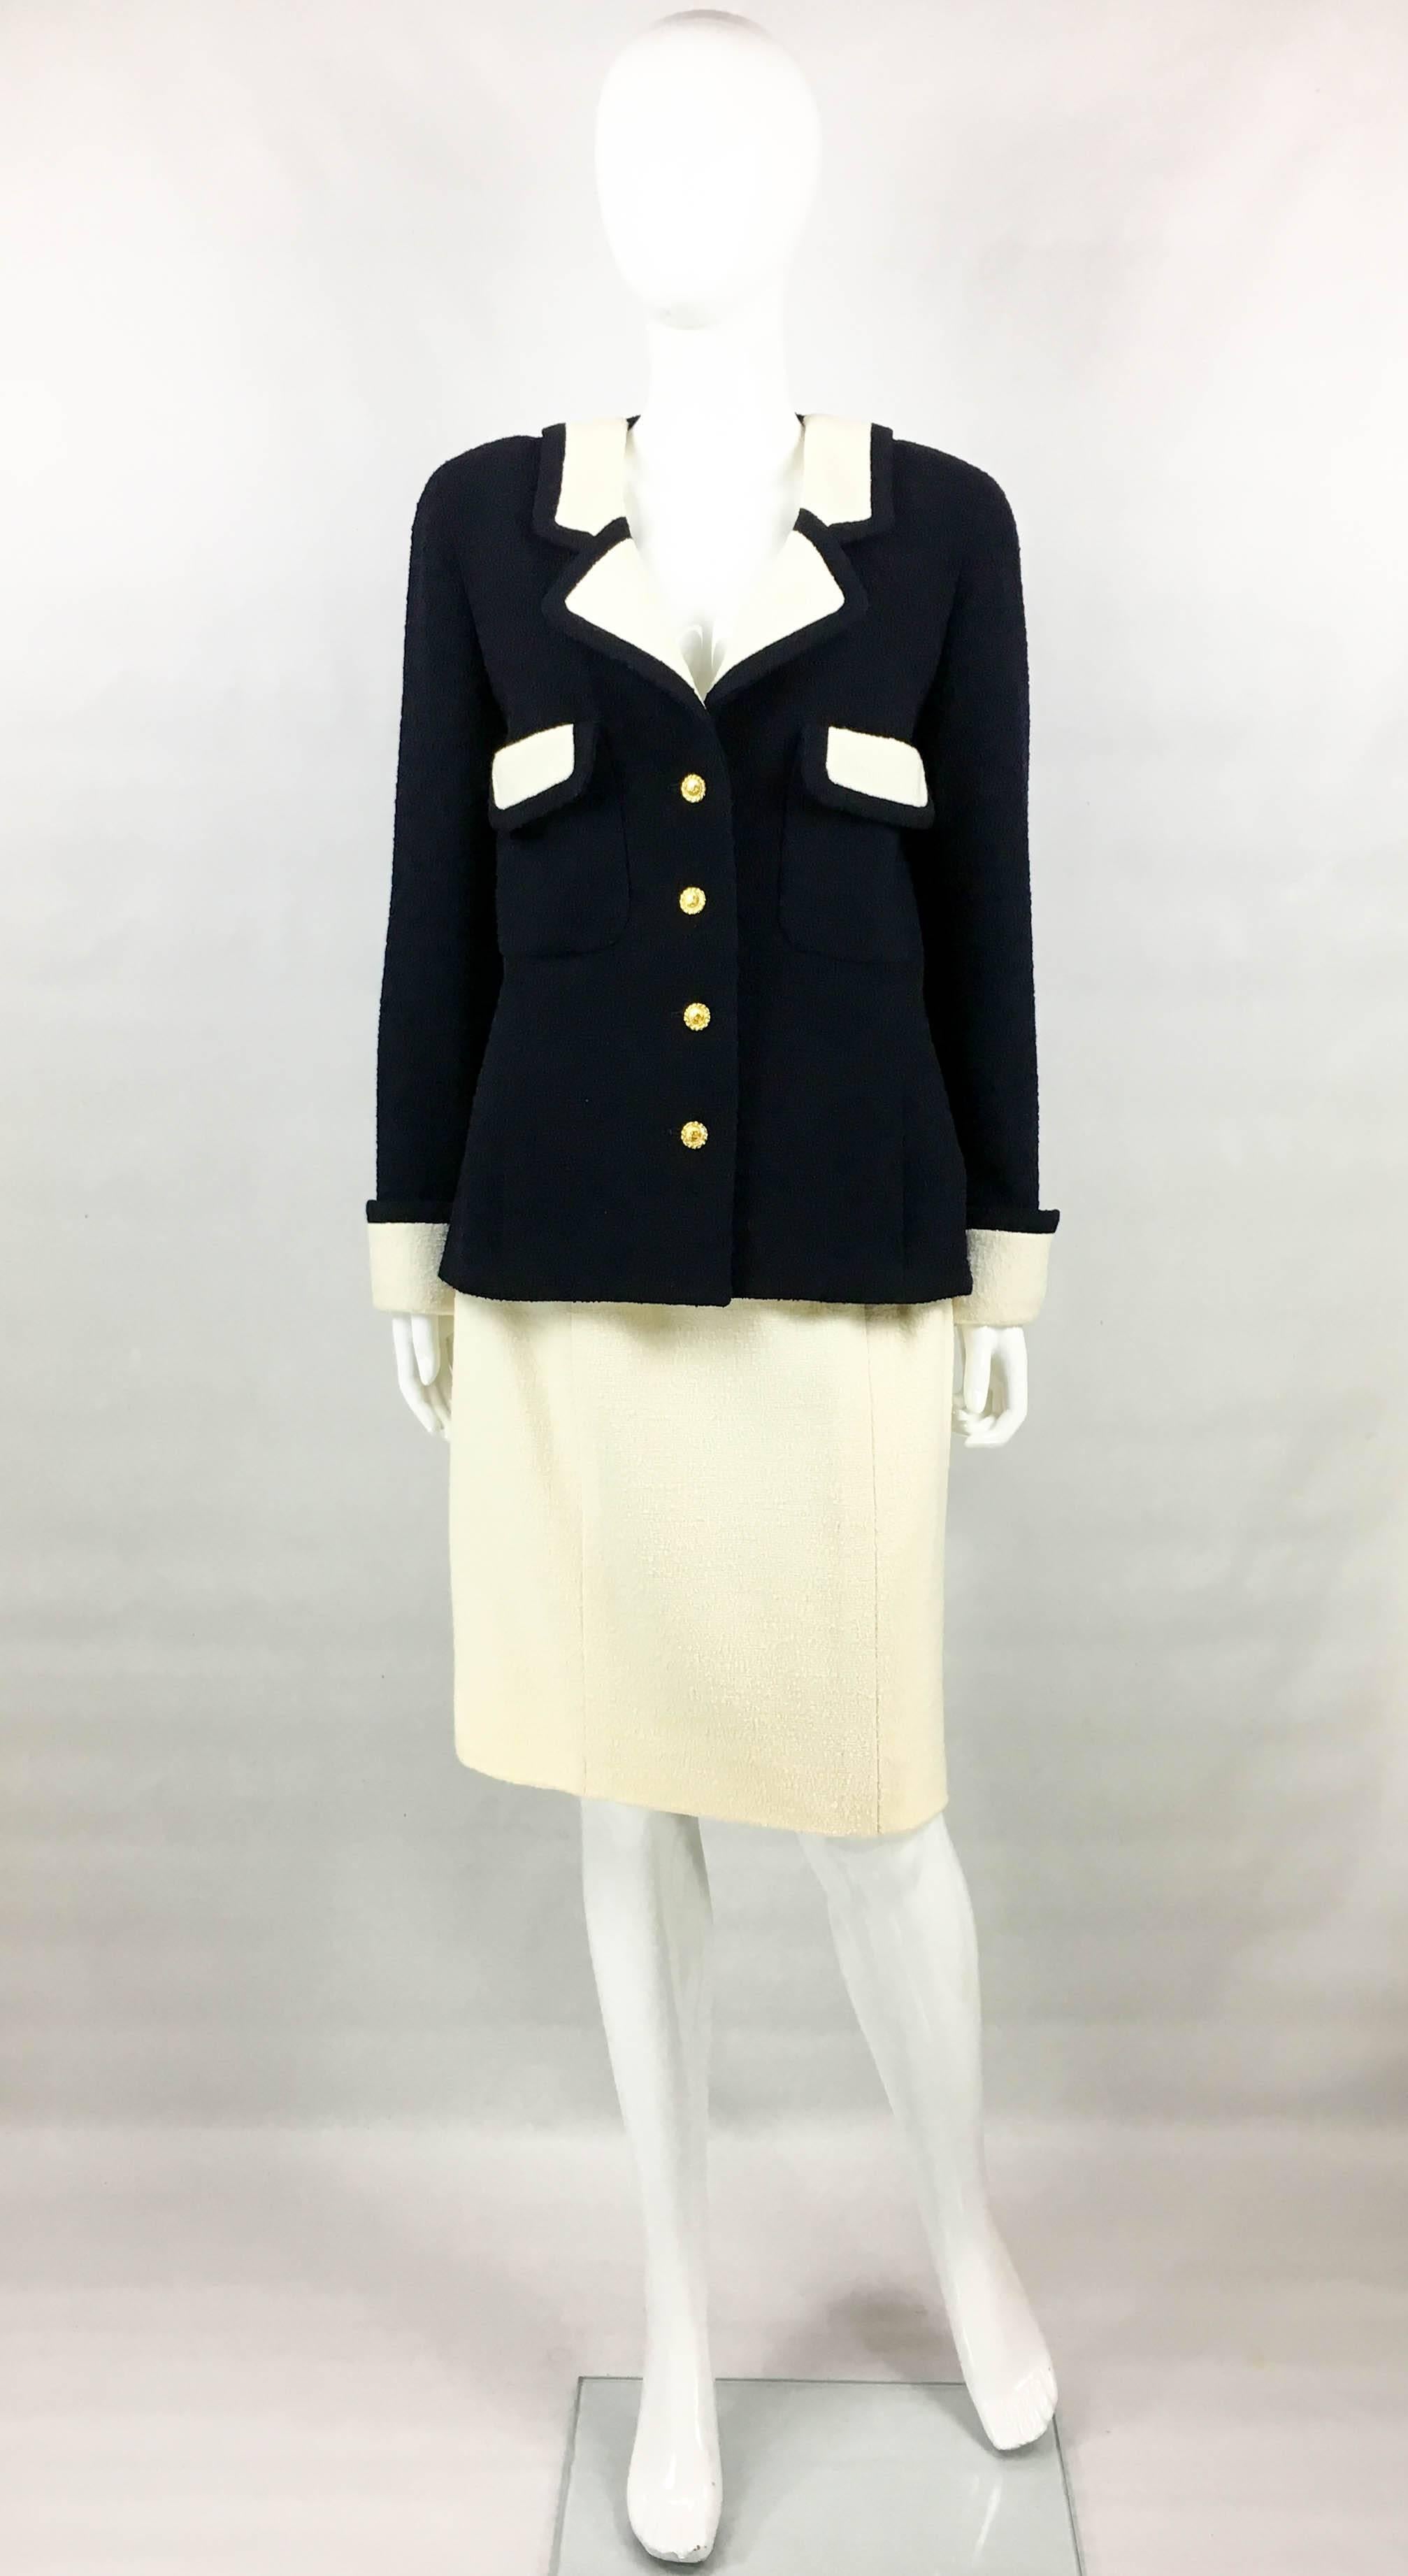 Stylish Vintage Chanel Nautical Inspired Wool Skirt Suit. From the early 1980’s, this beautiful suit by Chanel is made in wool, as well as being silk lined. In navy blue and white, it features Chanel signed gilt buttons with the iconic ‘CC’ logo and